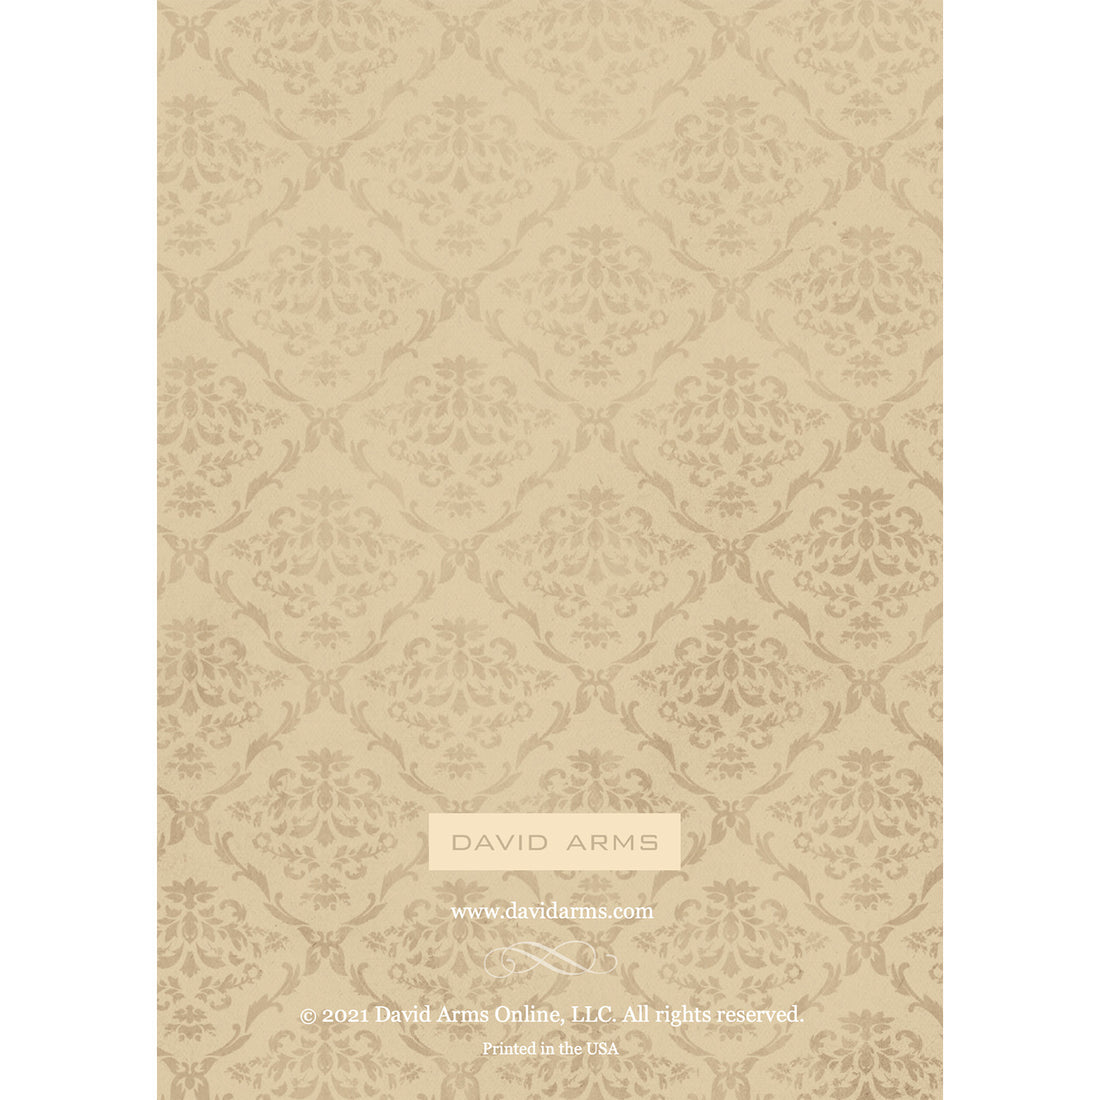 The beige damask patterned back side of the greeting card, featuring the name of the artist David Arms.